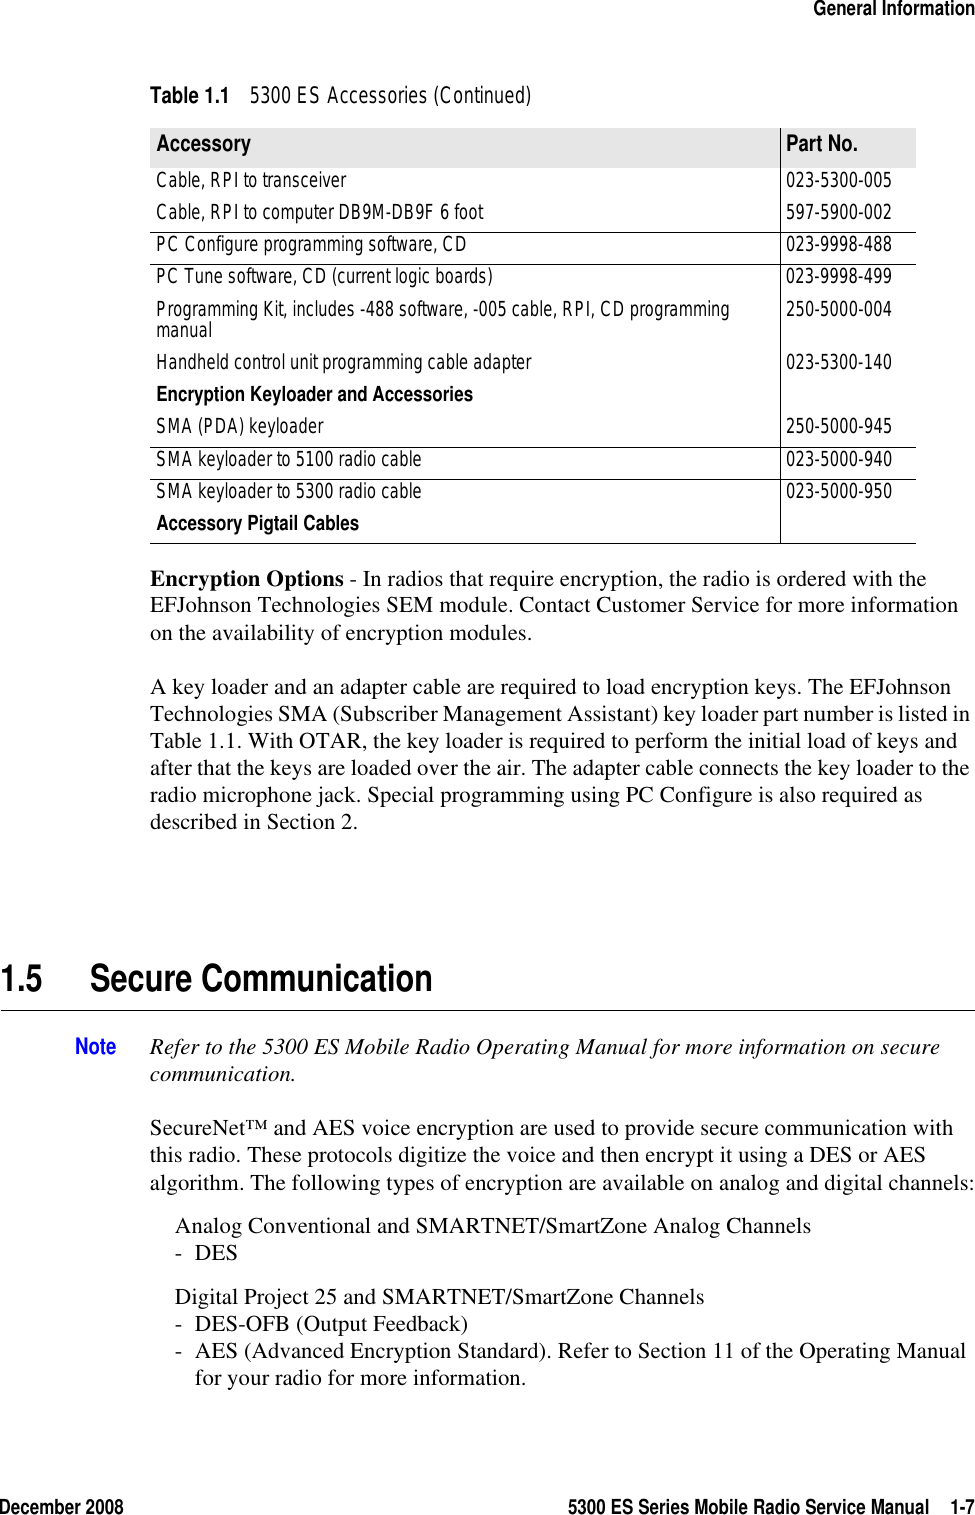 December 2008 5300 ES Series Mobile Radio Service Manual 1-7General InformationEncryption Options - In radios that require encryption, the radio is ordered with the EFJohnson Technologies SEM module. Contact Customer Service for more information on the availability of encryption modules.A key loader and an adapter cable are required to load encryption keys. The EFJohnson Technologies SMA (Subscriber Management Assistant) key loader part number is listed in Table 1.1. With OTAR, the key loader is required to perform the initial load of keys and after that the keys are loaded over the air. The adapter cable connects the key loader to the radio microphone jack. Special programming using PC Configure is also required as described in Section 2.1.5 Secure CommunicationNote Refer to the 5300 ES Mobile Radio Operating Manual for more information on secure communication. SecureNet™ and AES voice encryption are used to provide secure communication with this radio. These protocols digitize the voice and then encrypt it using a DES or AES algorithm. The following types of encryption are available on analog and digital channels:Analog Conventional and SMARTNET/SmartZone Analog Channels-DESDigital Project 25 and SMARTNET/SmartZone Channels- DES-OFB (Output Feedback)- AES (Advanced Encryption Standard). Refer to Section 11 of the Operating Manual for your radio for more information.Cable, RPI to transceiver  023-5300-005Cable, RPI to computer DB9M-DB9F 6 foot 597-5900-002PC Configure programming software, CD 023-9998-488PC Tune software, CD (current logic boards) 023-9998-499Programming Kit, includes -488 software, -005 cable, RPI, CD programming manual 250-5000-004Handheld control unit programming cable adapter 023-5300-140Encryption Keyloader and Accessories SMA (PDA) keyloader 250-5000-945SMA keyloader to 5100 radio cable 023-5000-940SMA keyloader to 5300 radio cable 023-5000-950Accessory Pigtail CablesTable 1.1 5300 ES Accessories (Continued)Accessory Part No.